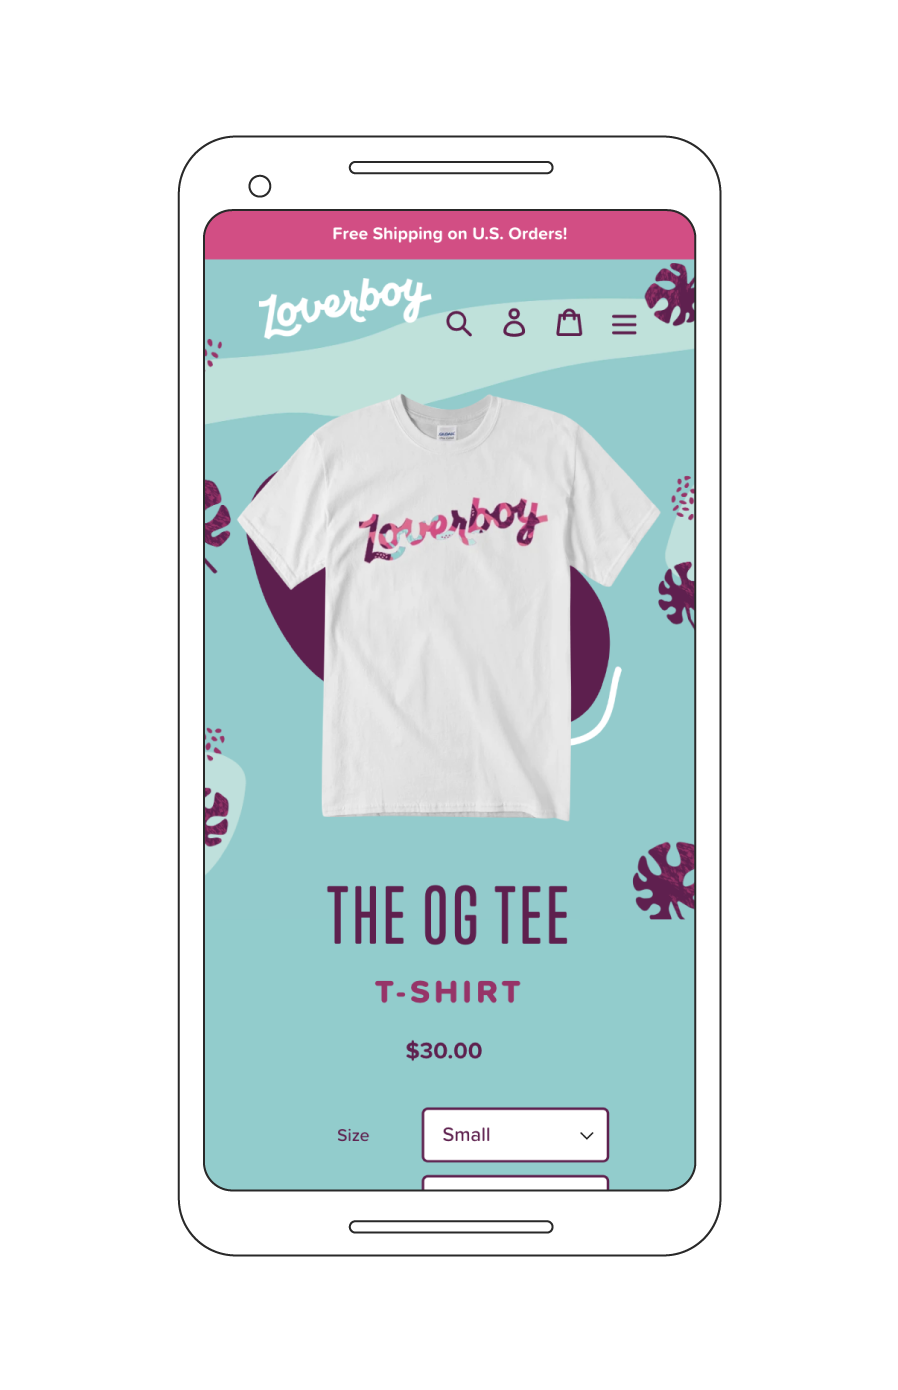 the og t-shirt from loverboy displayed on mobile screen template